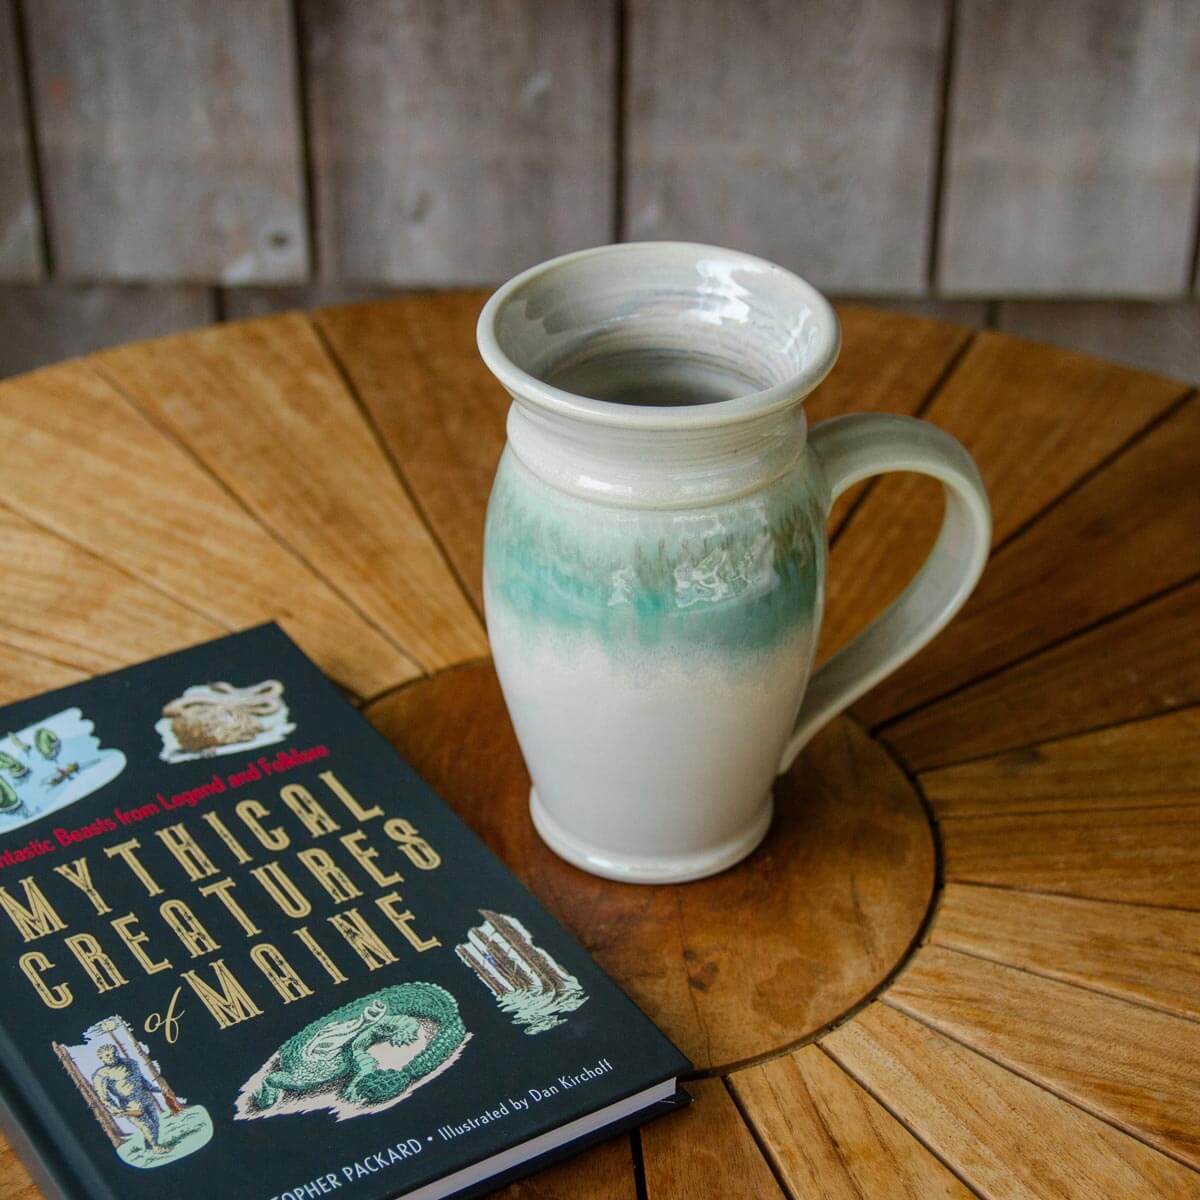 Pairing - Beer Stein, Chattered Ivory Green & "Mythical Creatures of Maine" book